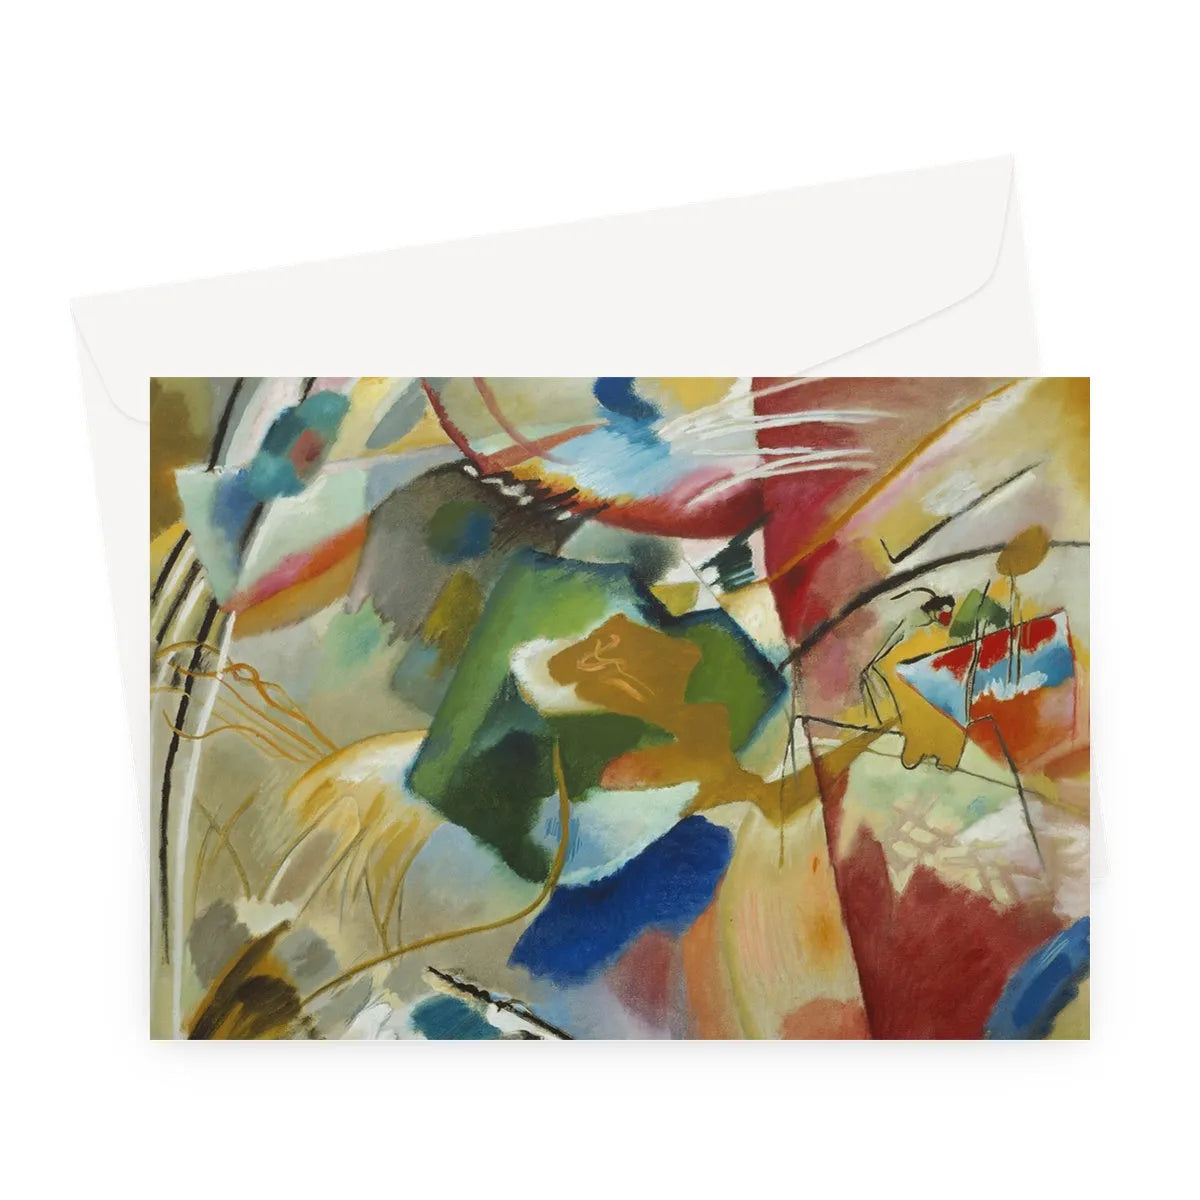 Painting With Green Center - Vasily Kandinsky Greeting Card - A5 Landscape / 1 Card - Greeting & Note Cards - Aesthetic